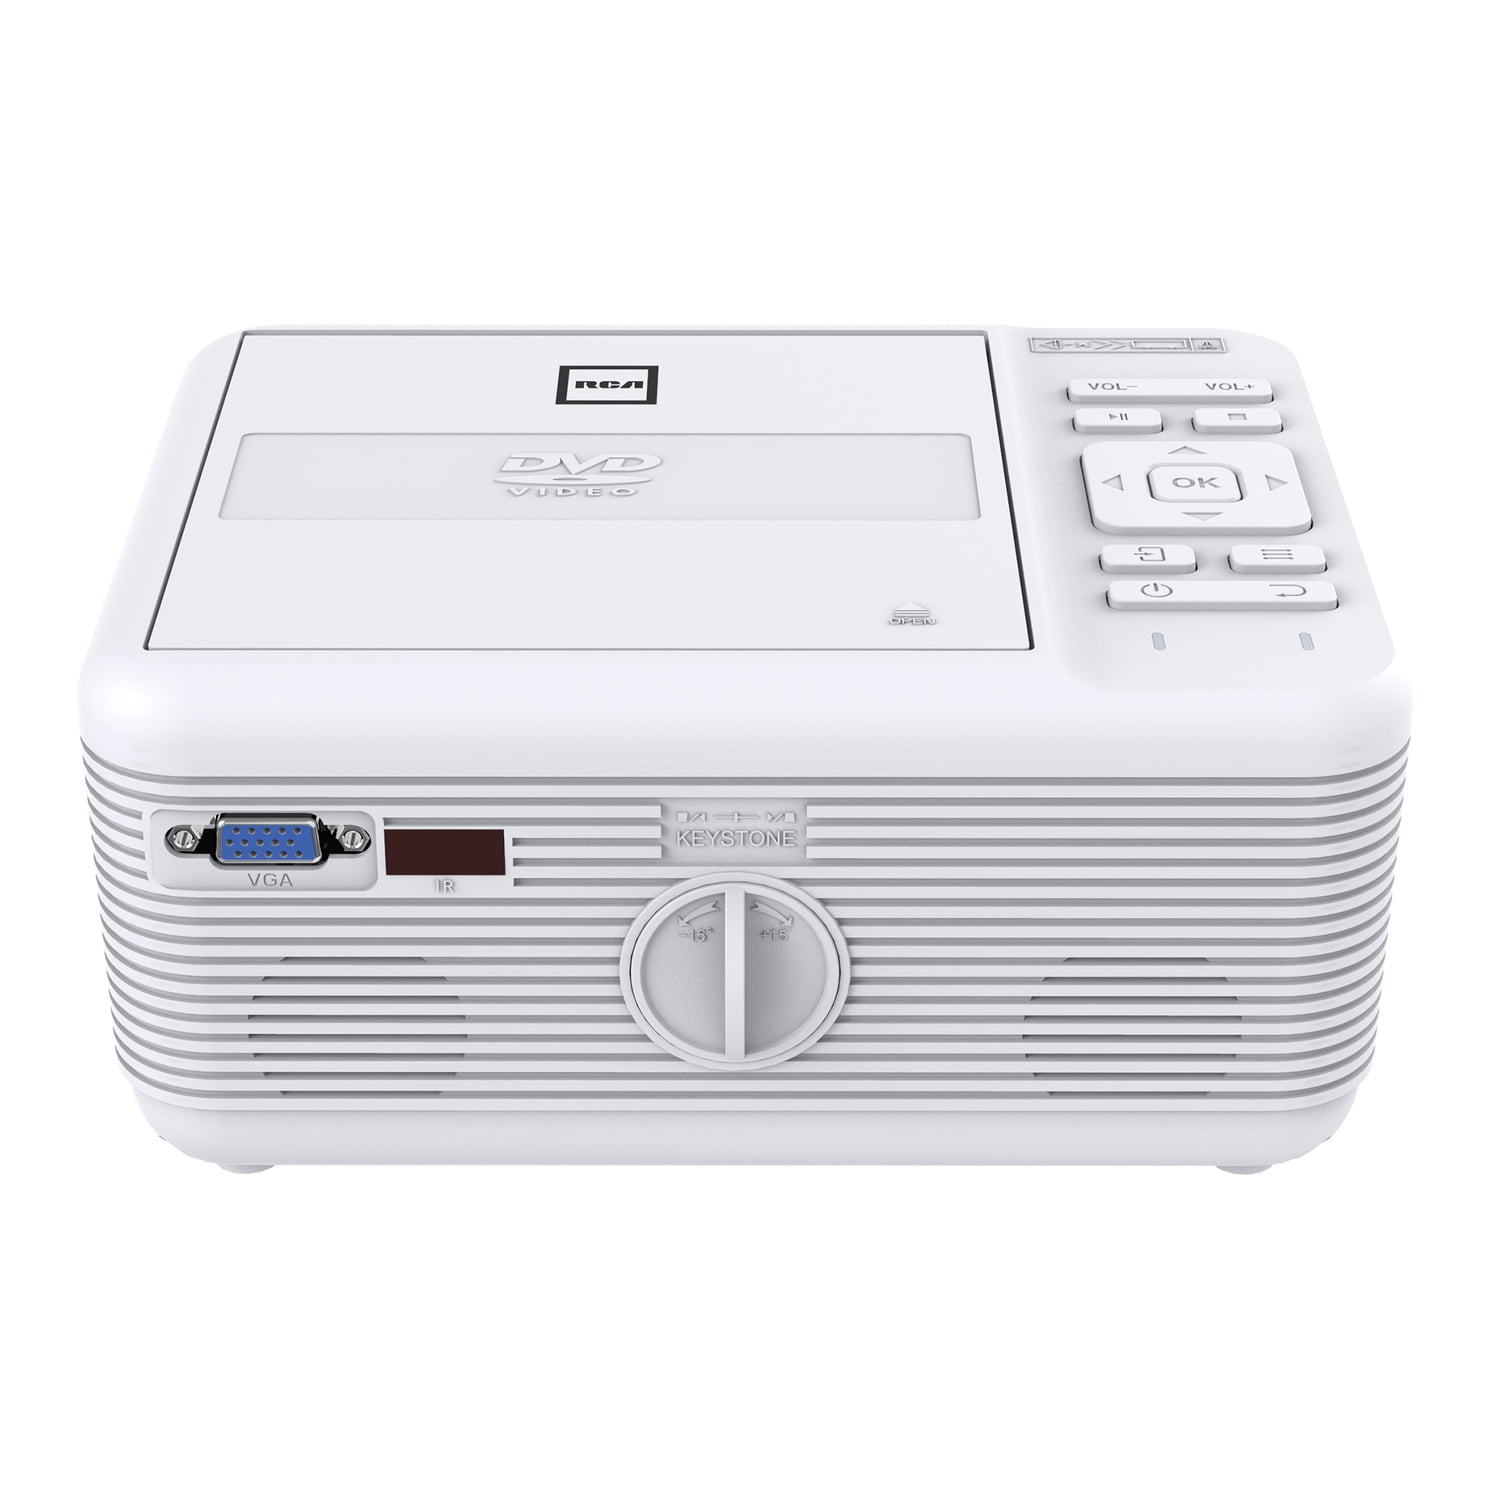 RCA Bluetooth 480p LCD Compact Projector with Built-in DVD Player, 100-In.  Foldup Screen, and Remote (White), RPJ241-COMBO-WHITE-V